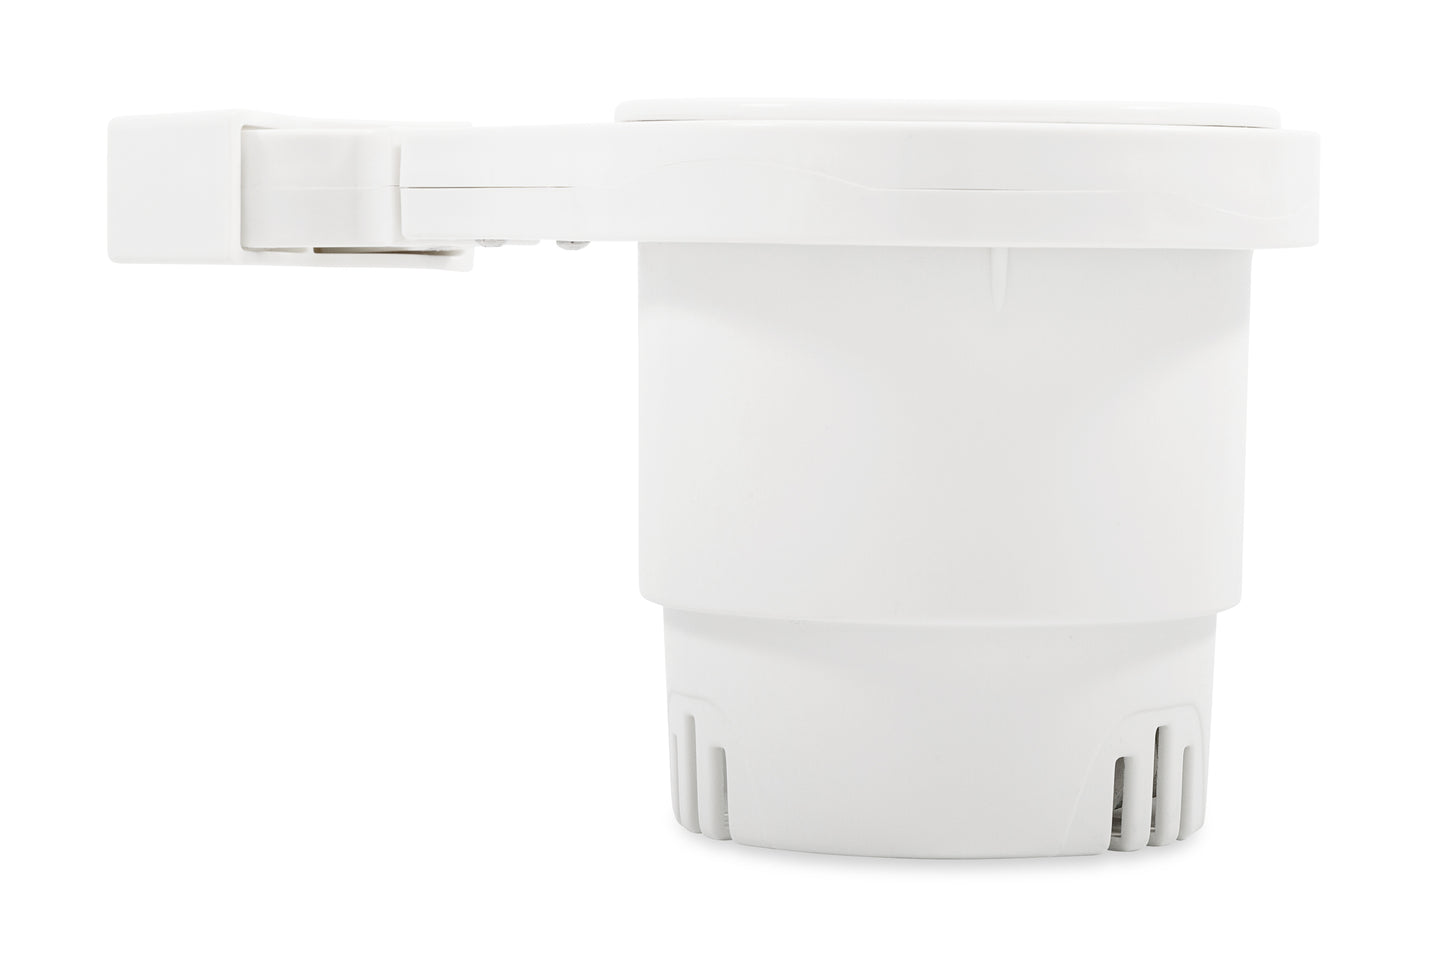 Camco Small Rail Mounted Cup Holder - White